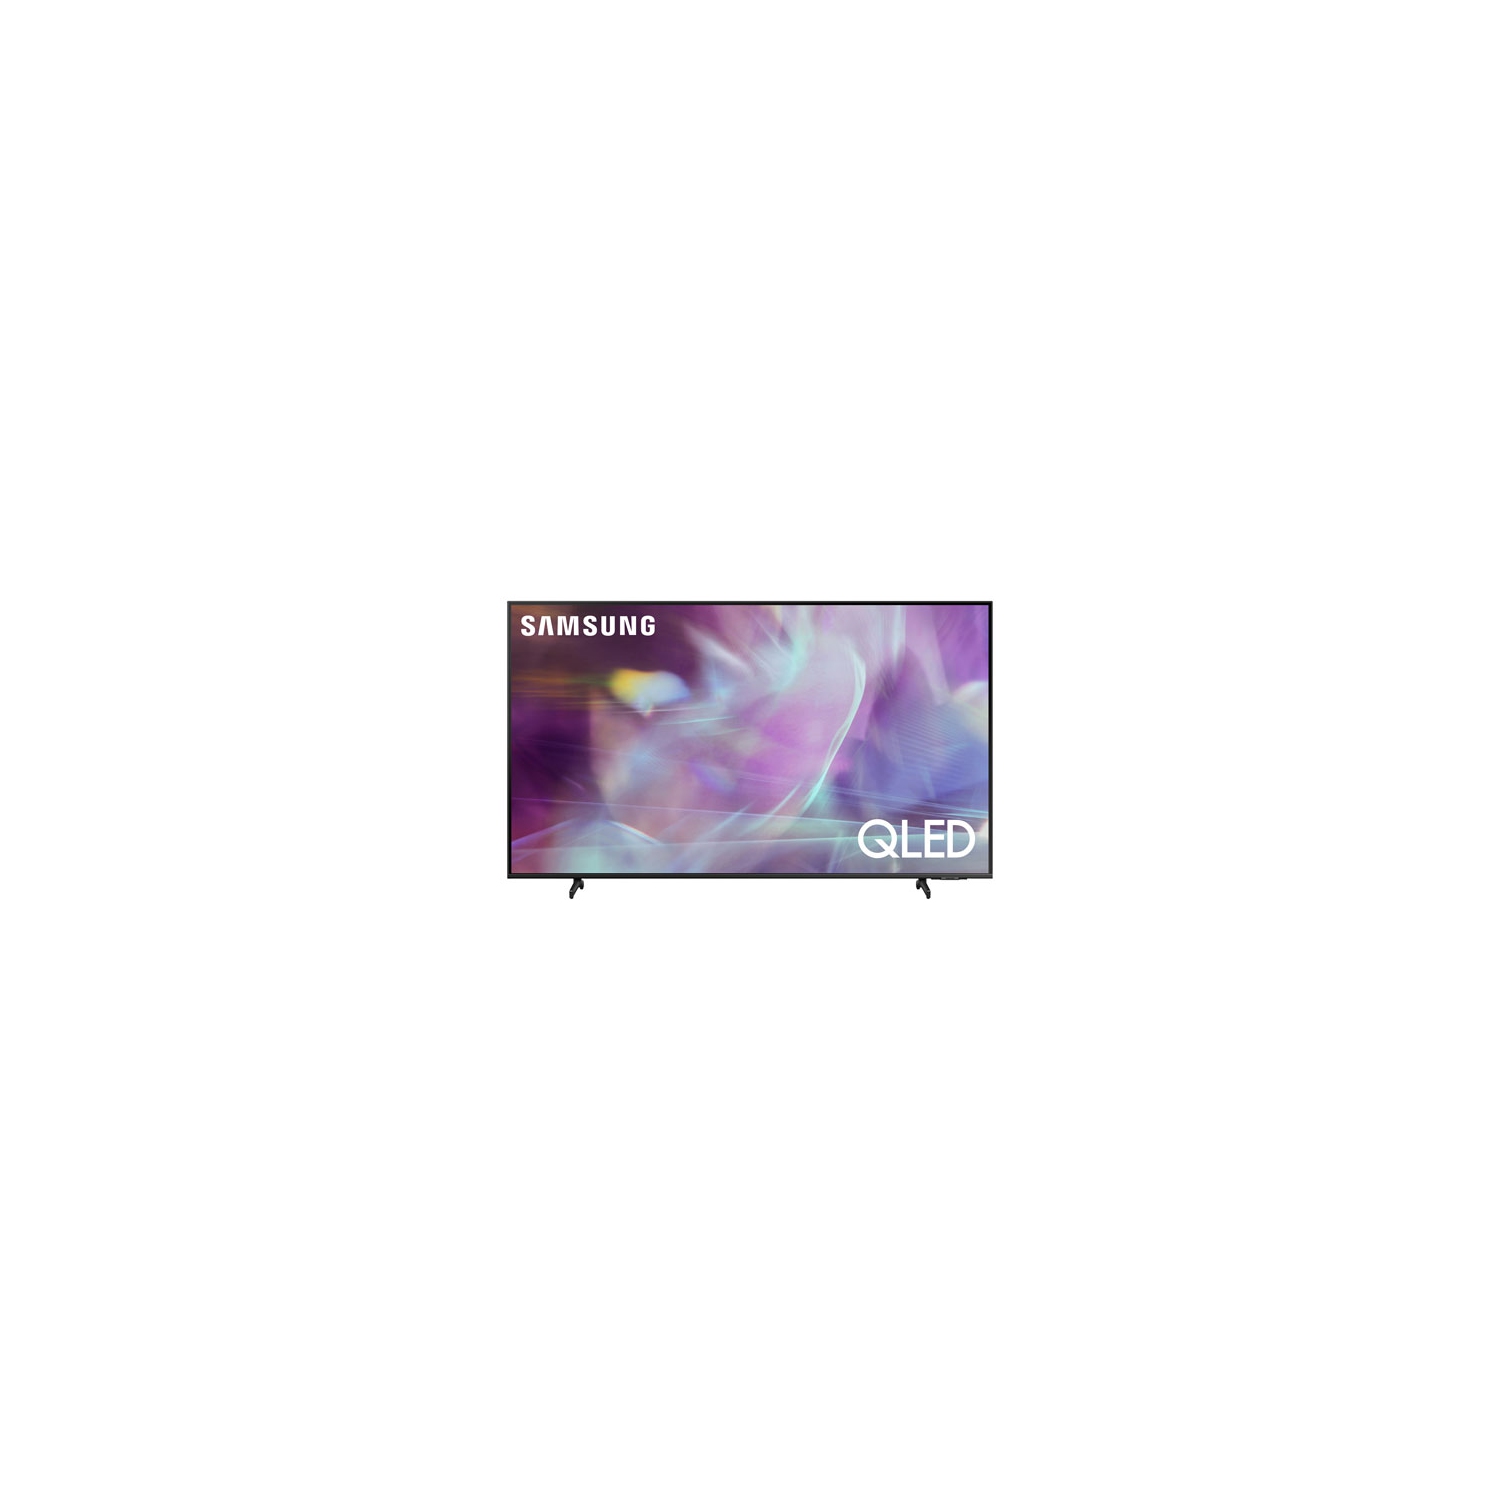 Samsung 60" 4K UHD HDR QLED Tizen Smart TV (QN60Q62AAFXZC) - Titan Grey - Open Box *LOCAL TORONTO DELIVERY ONLY*